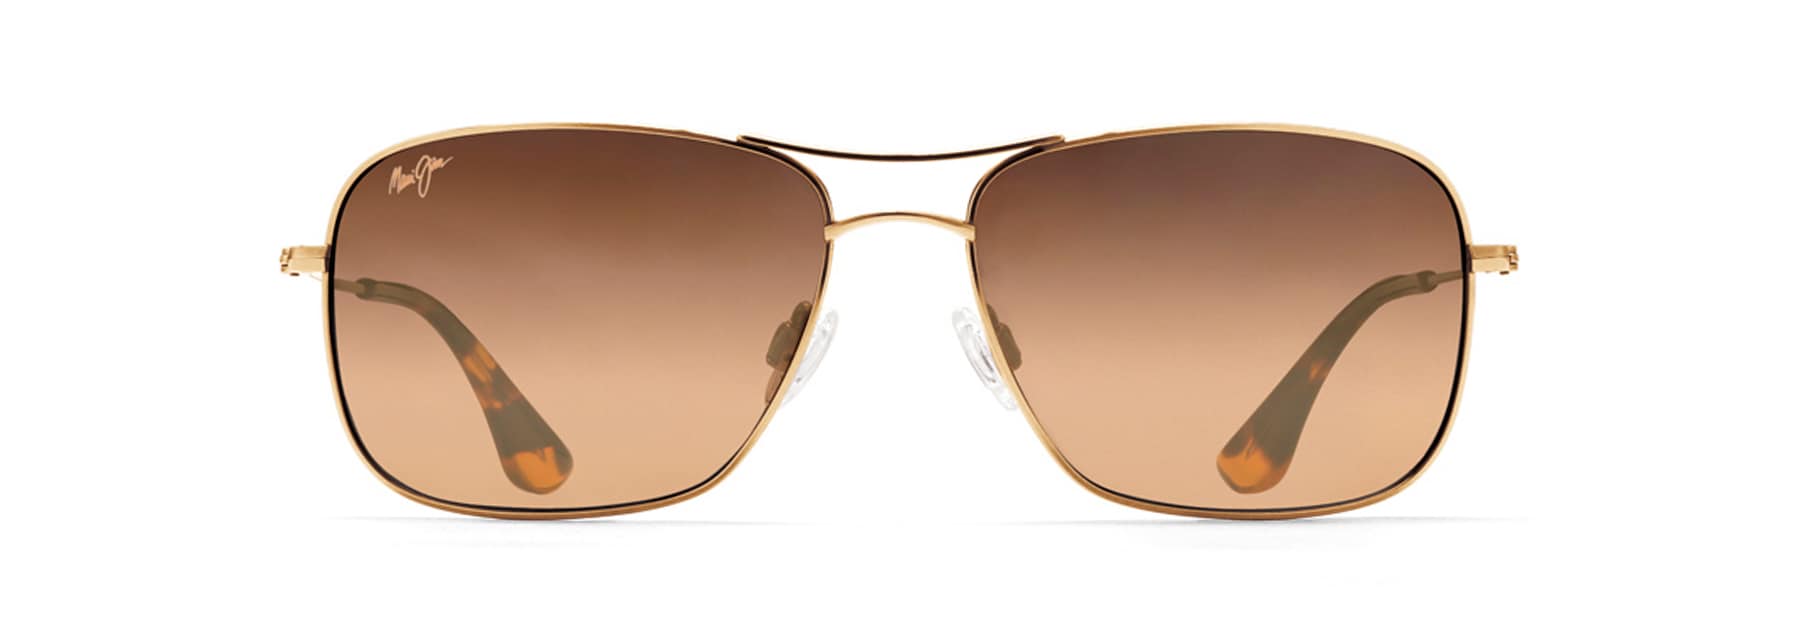 CLIFF HOUSE | Polarized Aviator Sunglasses with MauiPure | Shop